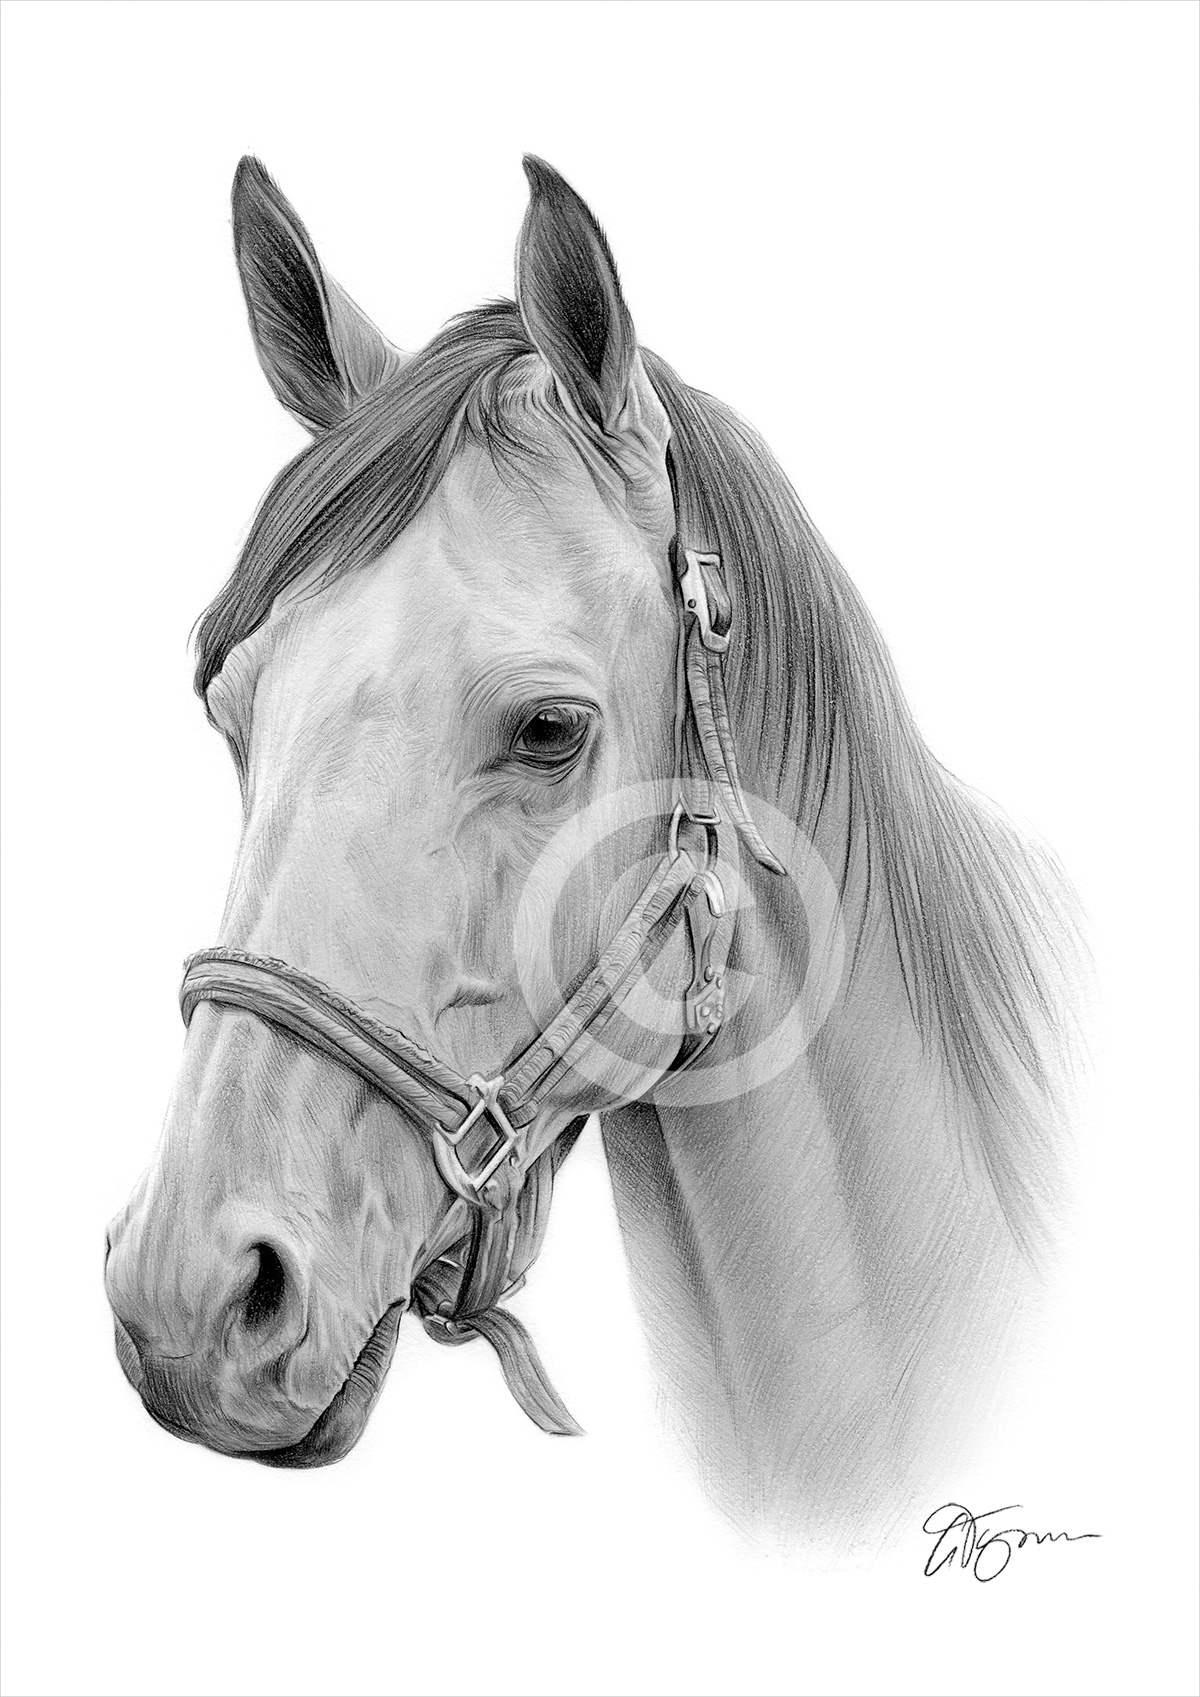 Pencil drawing of a horse by UK artist Gary Tymon